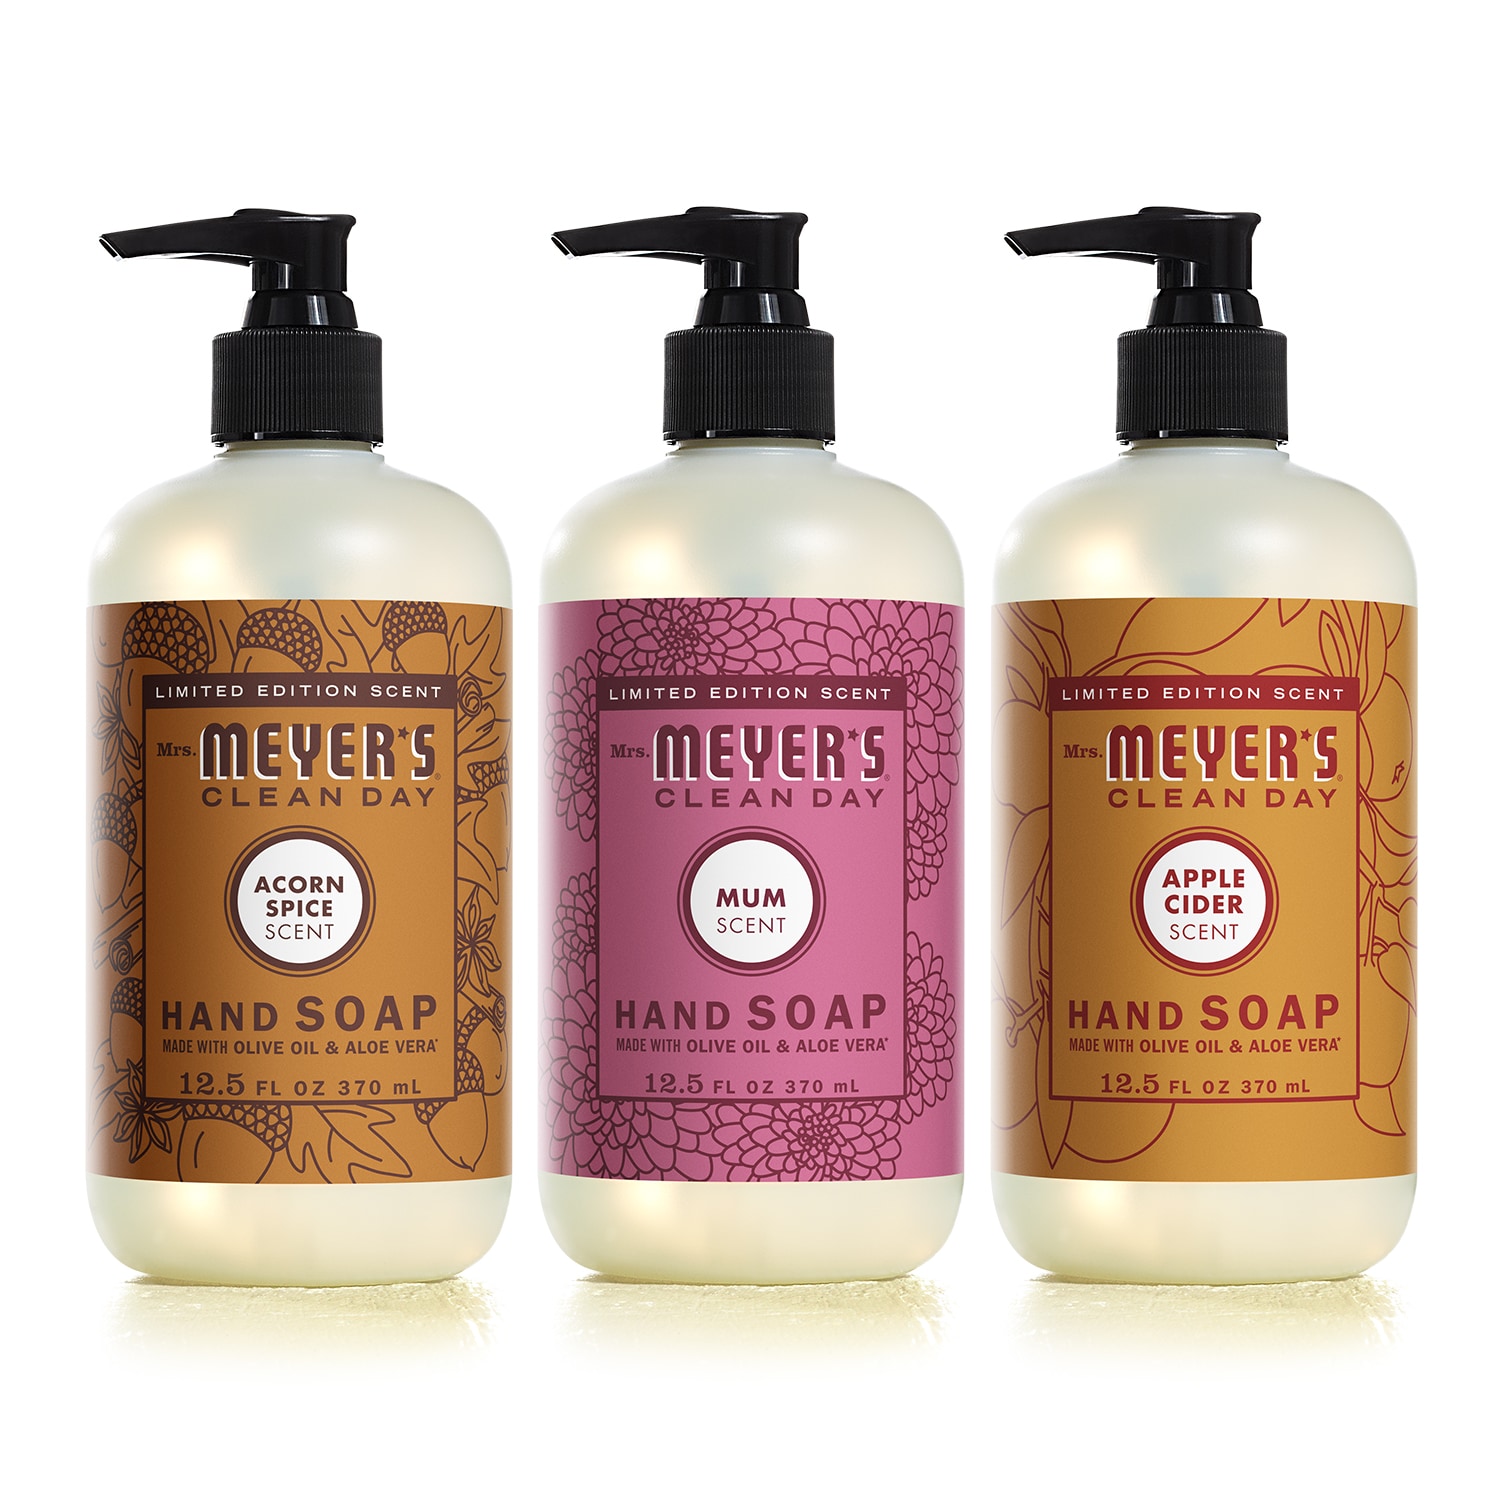 Shop MRS MEYERS CLEAN DAY Fall Hand Soap Variety Pack - Acorn Spice, Apple  Cider, and Mum Scents at